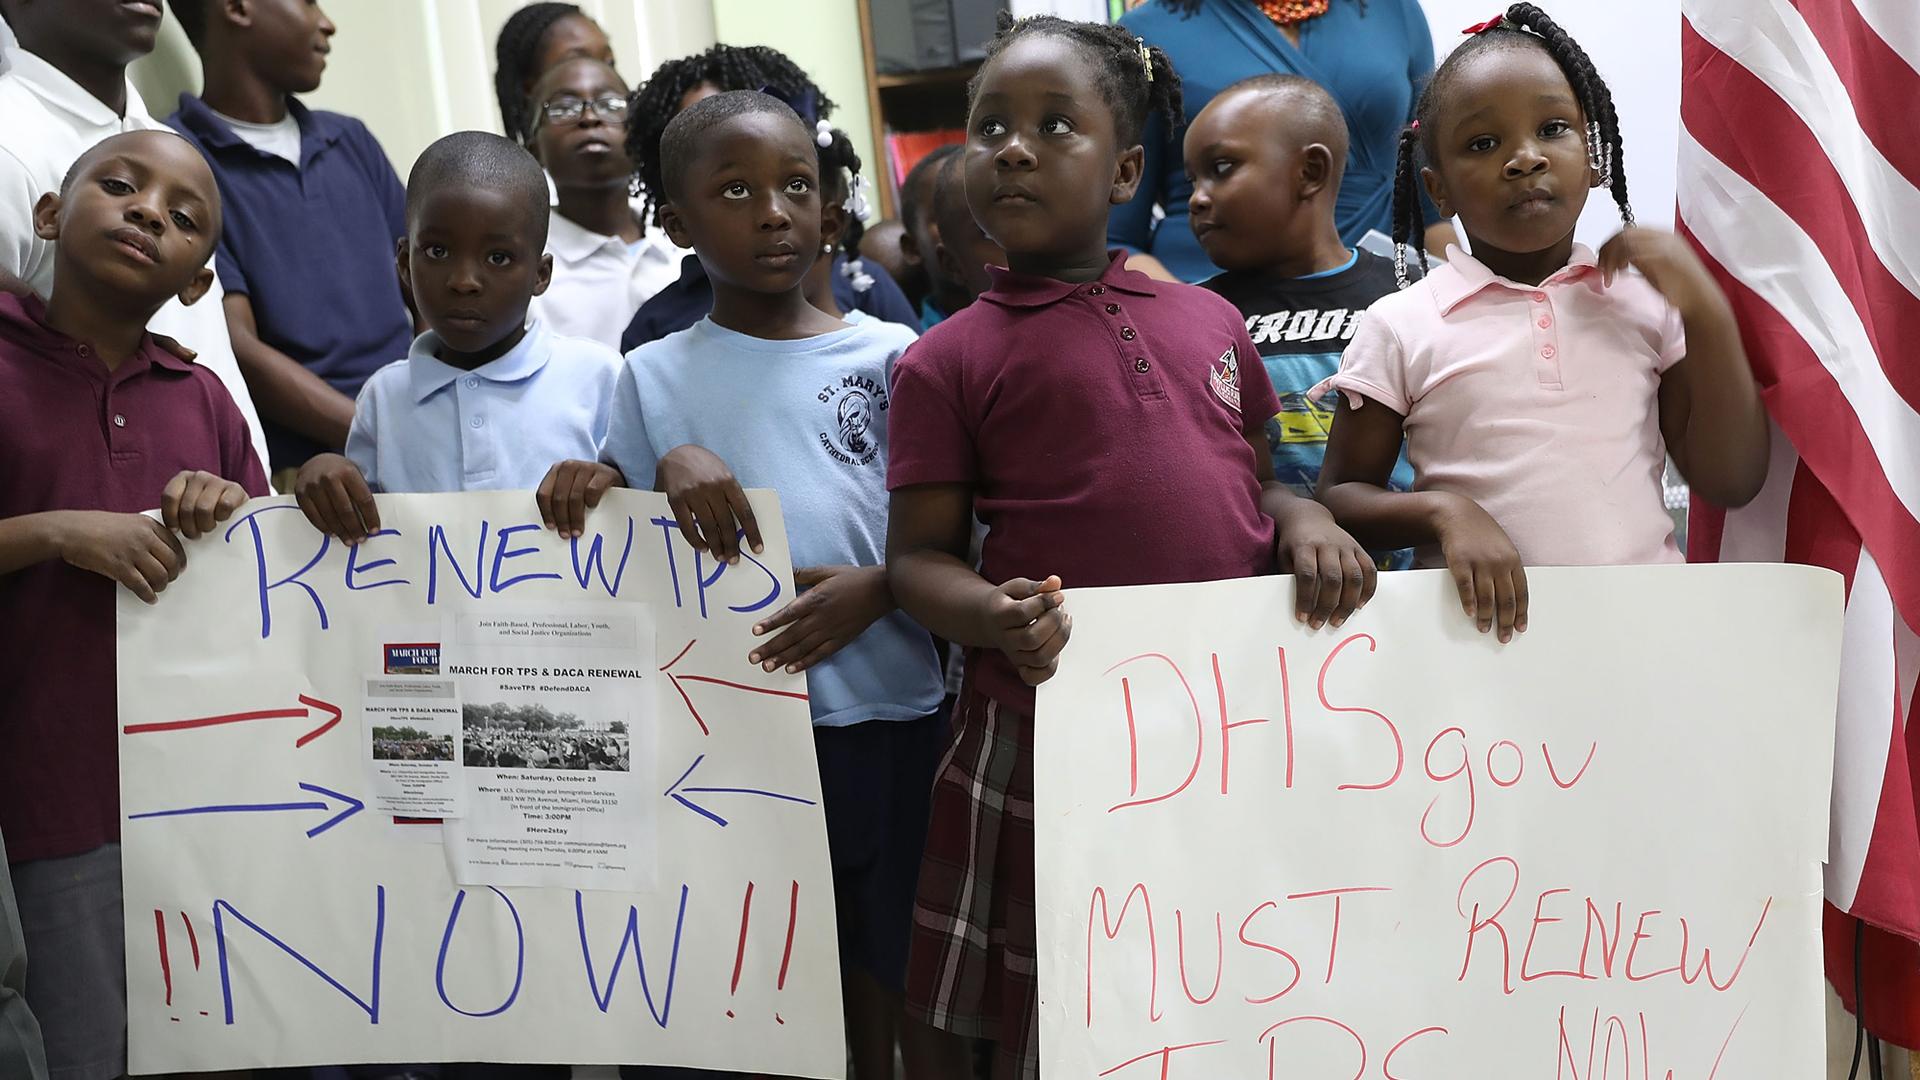 A group of several young children stand in a line with placards reading "Renew TPS Now."